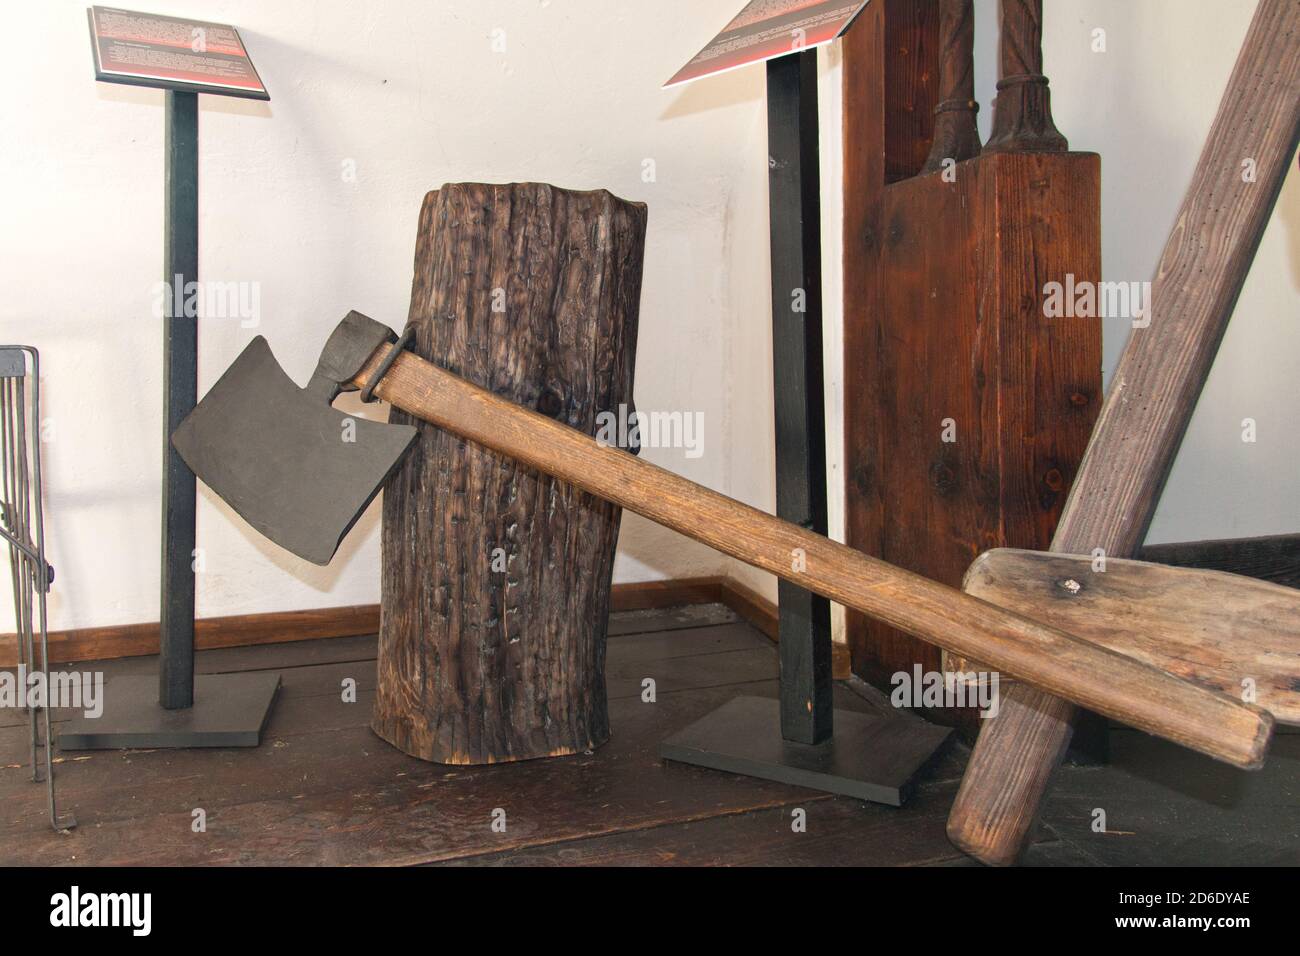 Torture beheading, or decapitation by broadsword, or axe.  Dracula castle. Stock Photo